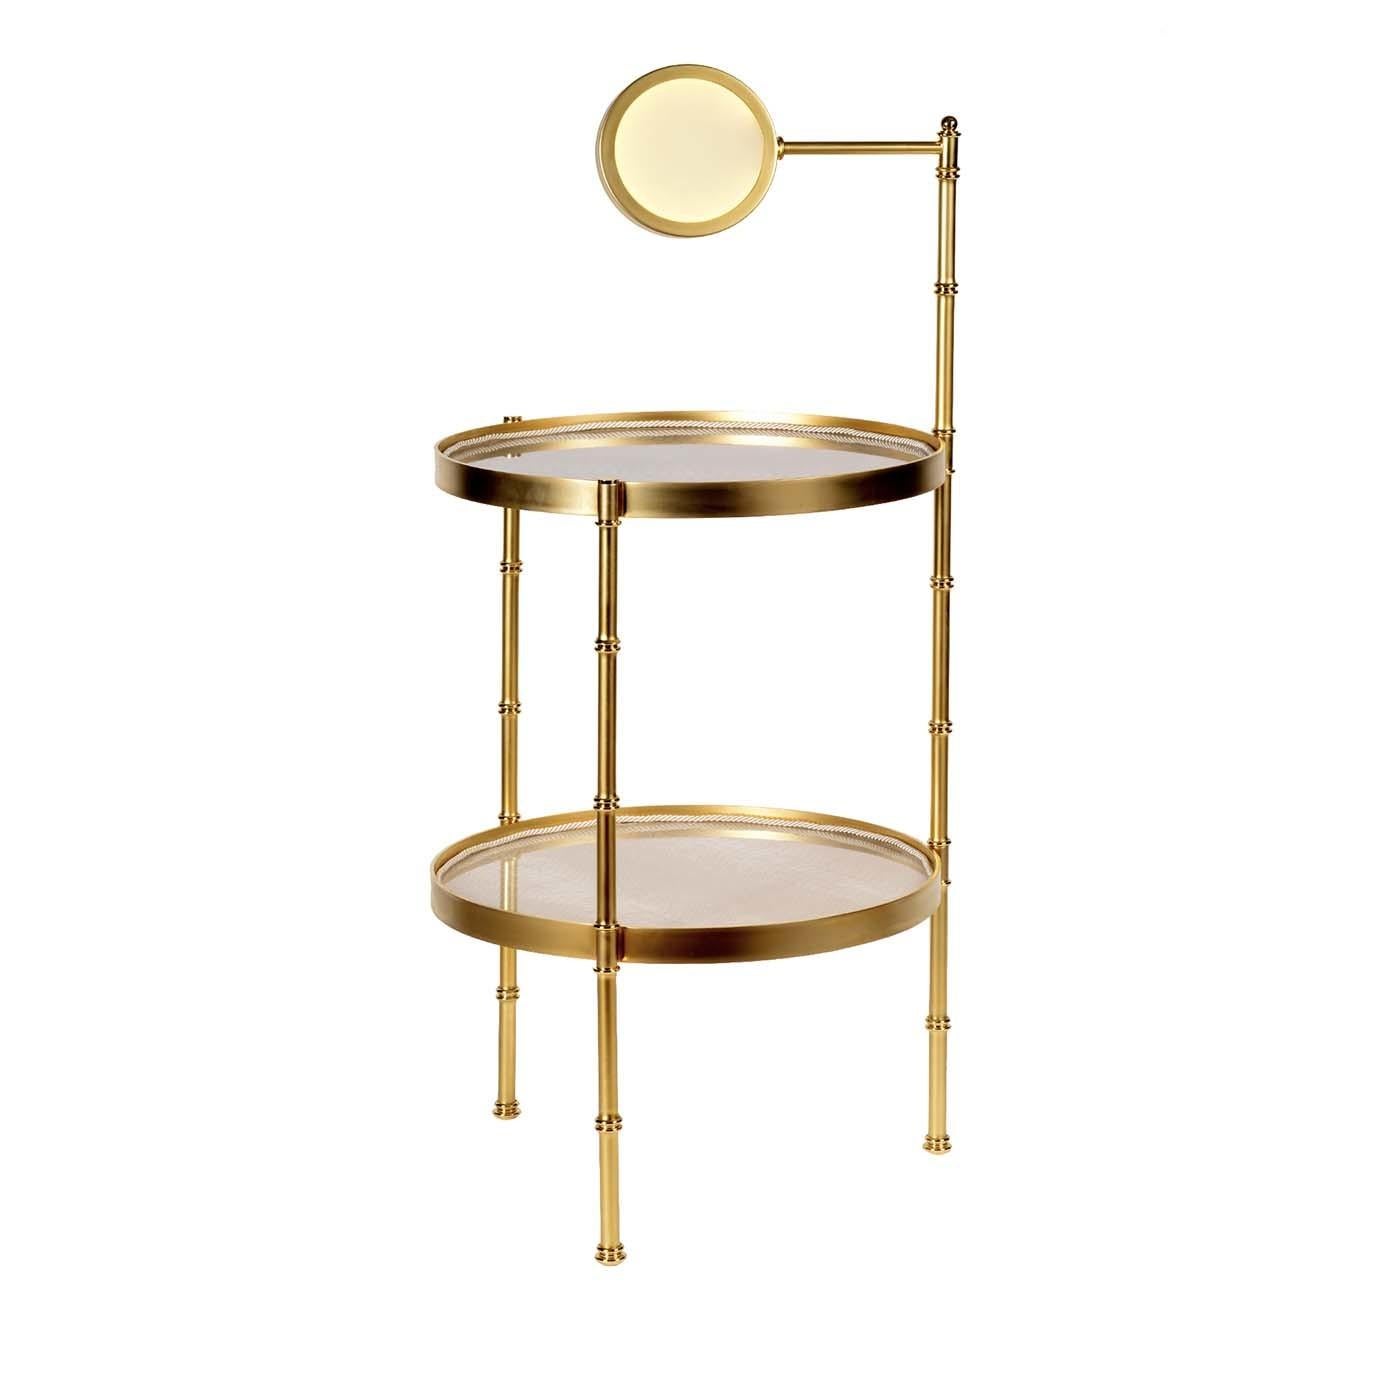 This refined coffee table will pair elegantly with a modern or Industrial interior decor. The sleek Silhouette is crafted of brass with a satin gold finish, with three tall legs supporting two circular table tops in wood with a glazed paper finish